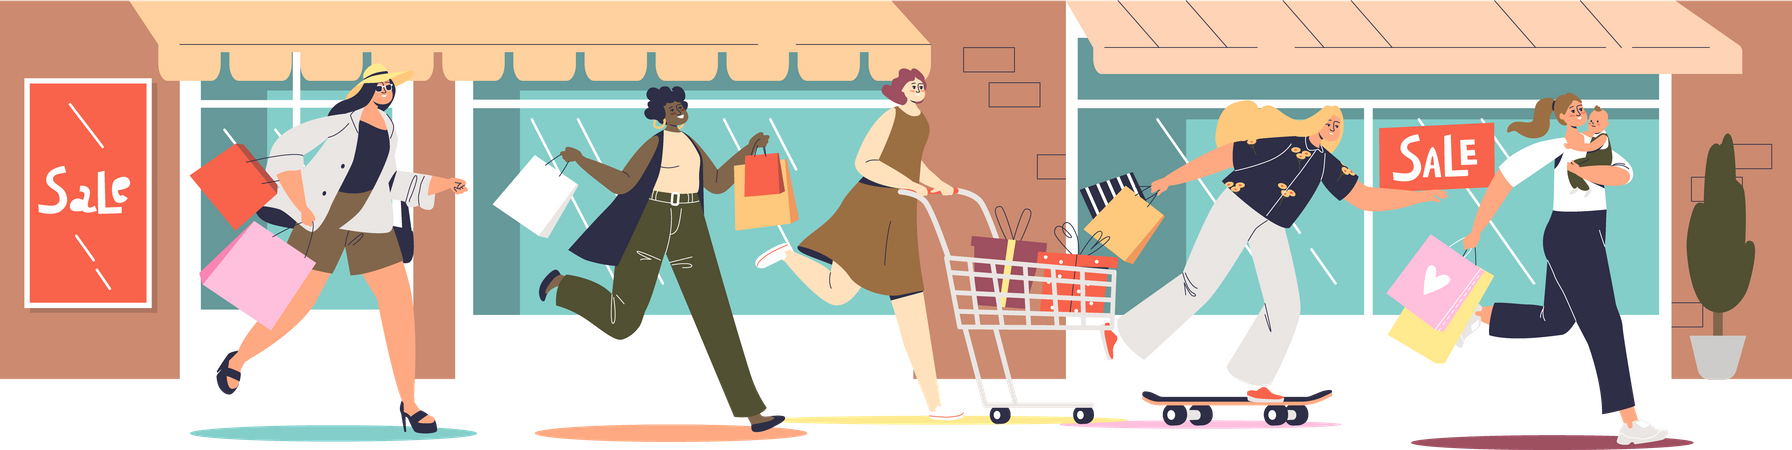 Women running to shop from store  Illustration